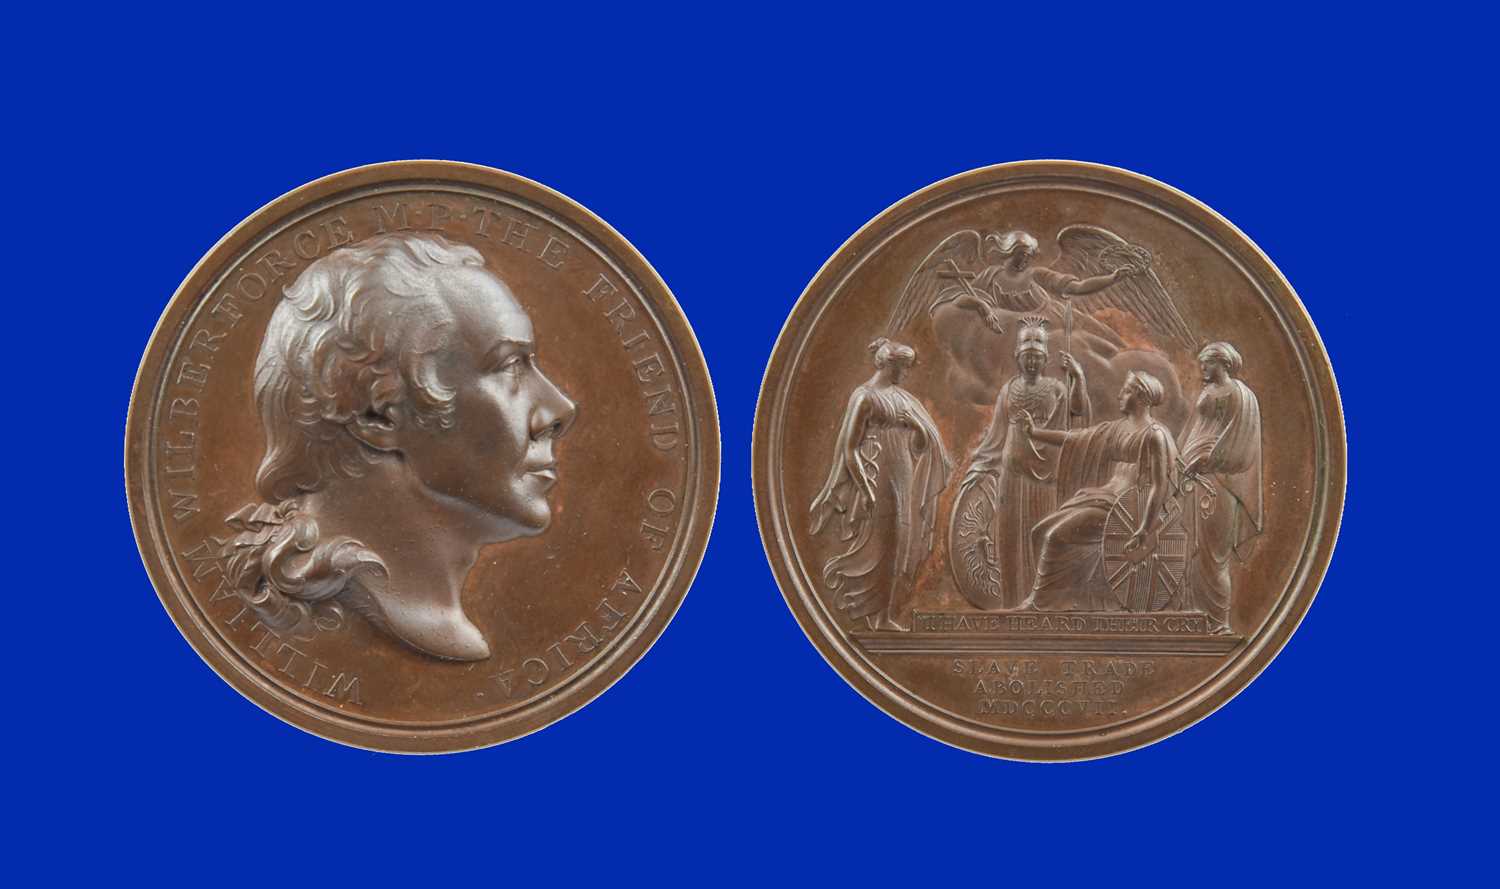 George III, Abolition of the Slave Trade 1807, a copper medal by T. Webb, head of William